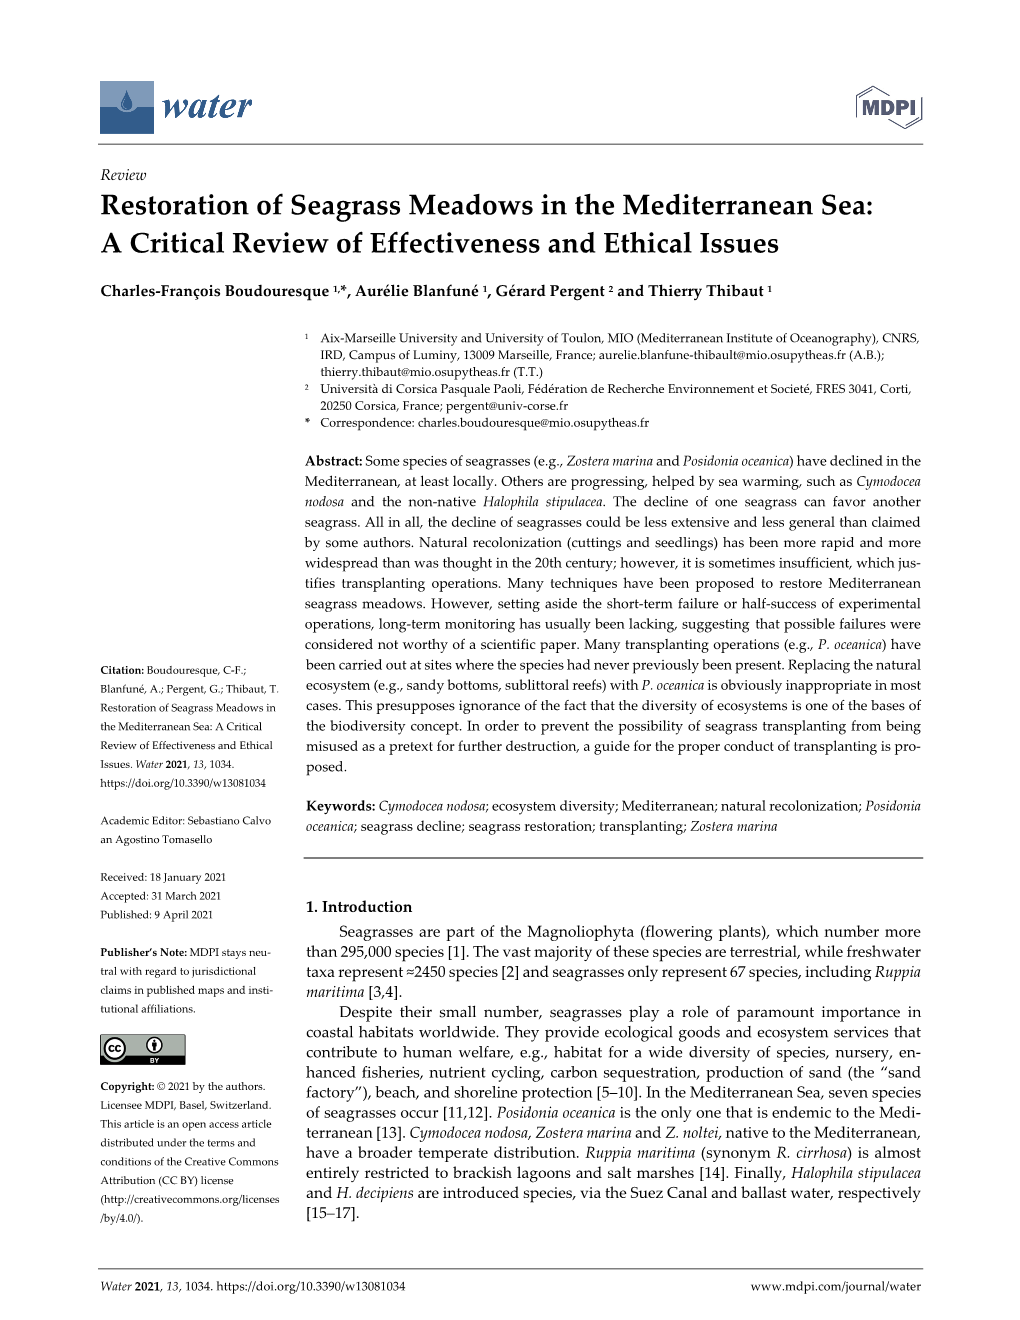 Restoration of Seagrass Meadows in the Mediterranean Sea: a Critical Review of Effectiveness and Ethical Issues